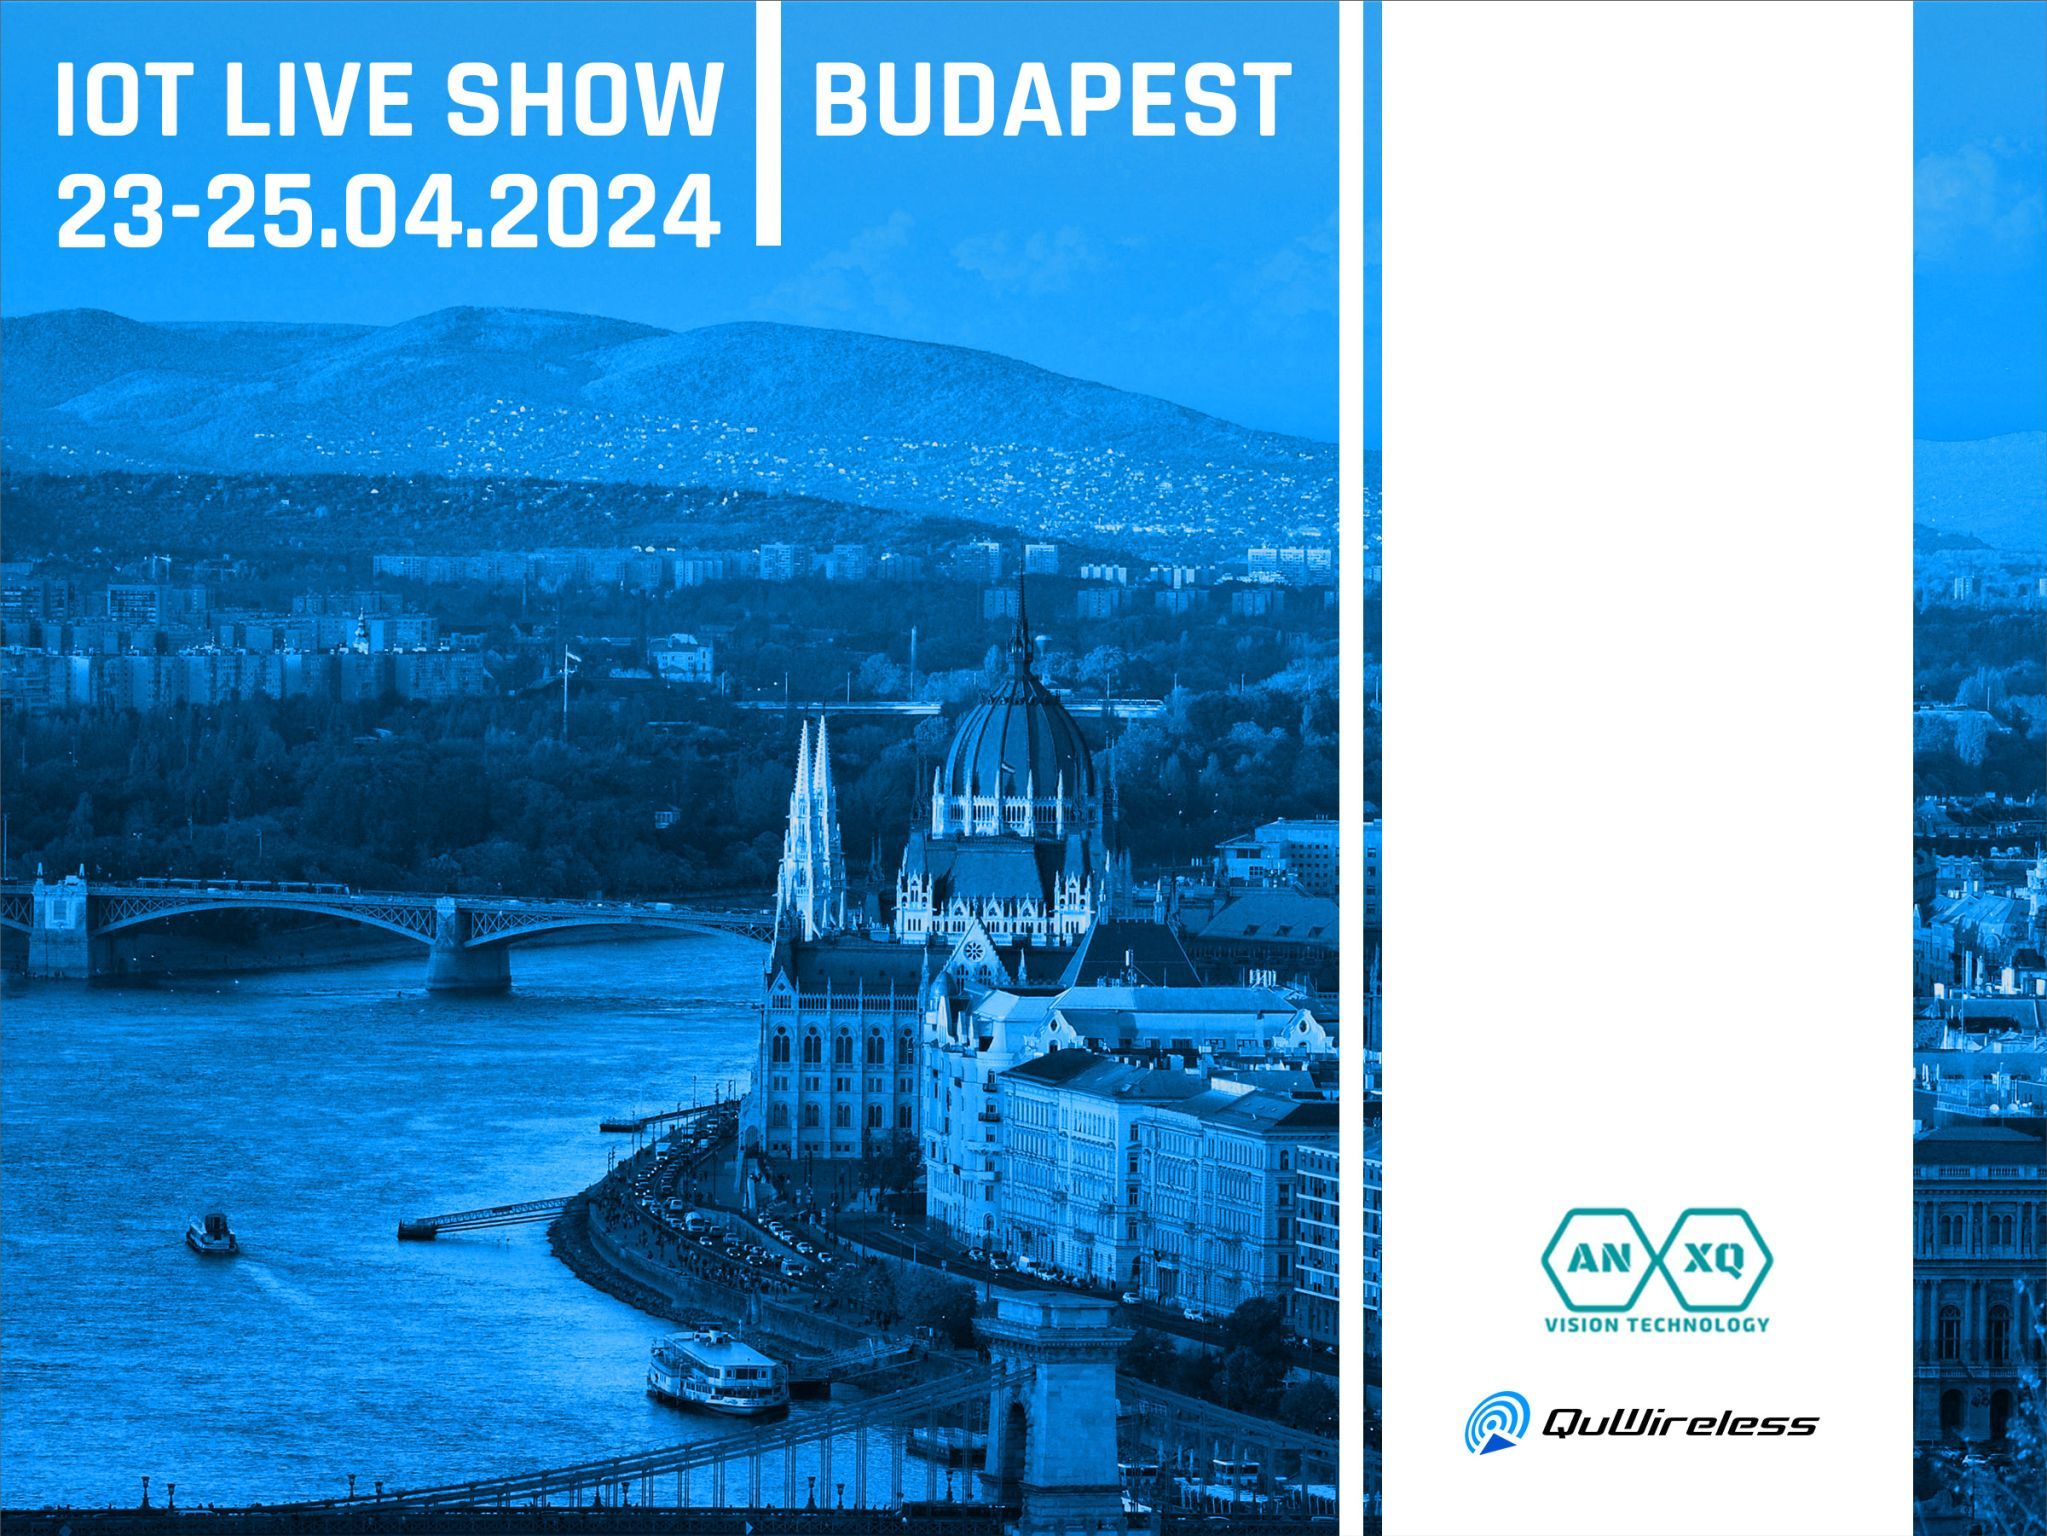 Preview of article QuWireless going to the Live IOT Show in Budapest